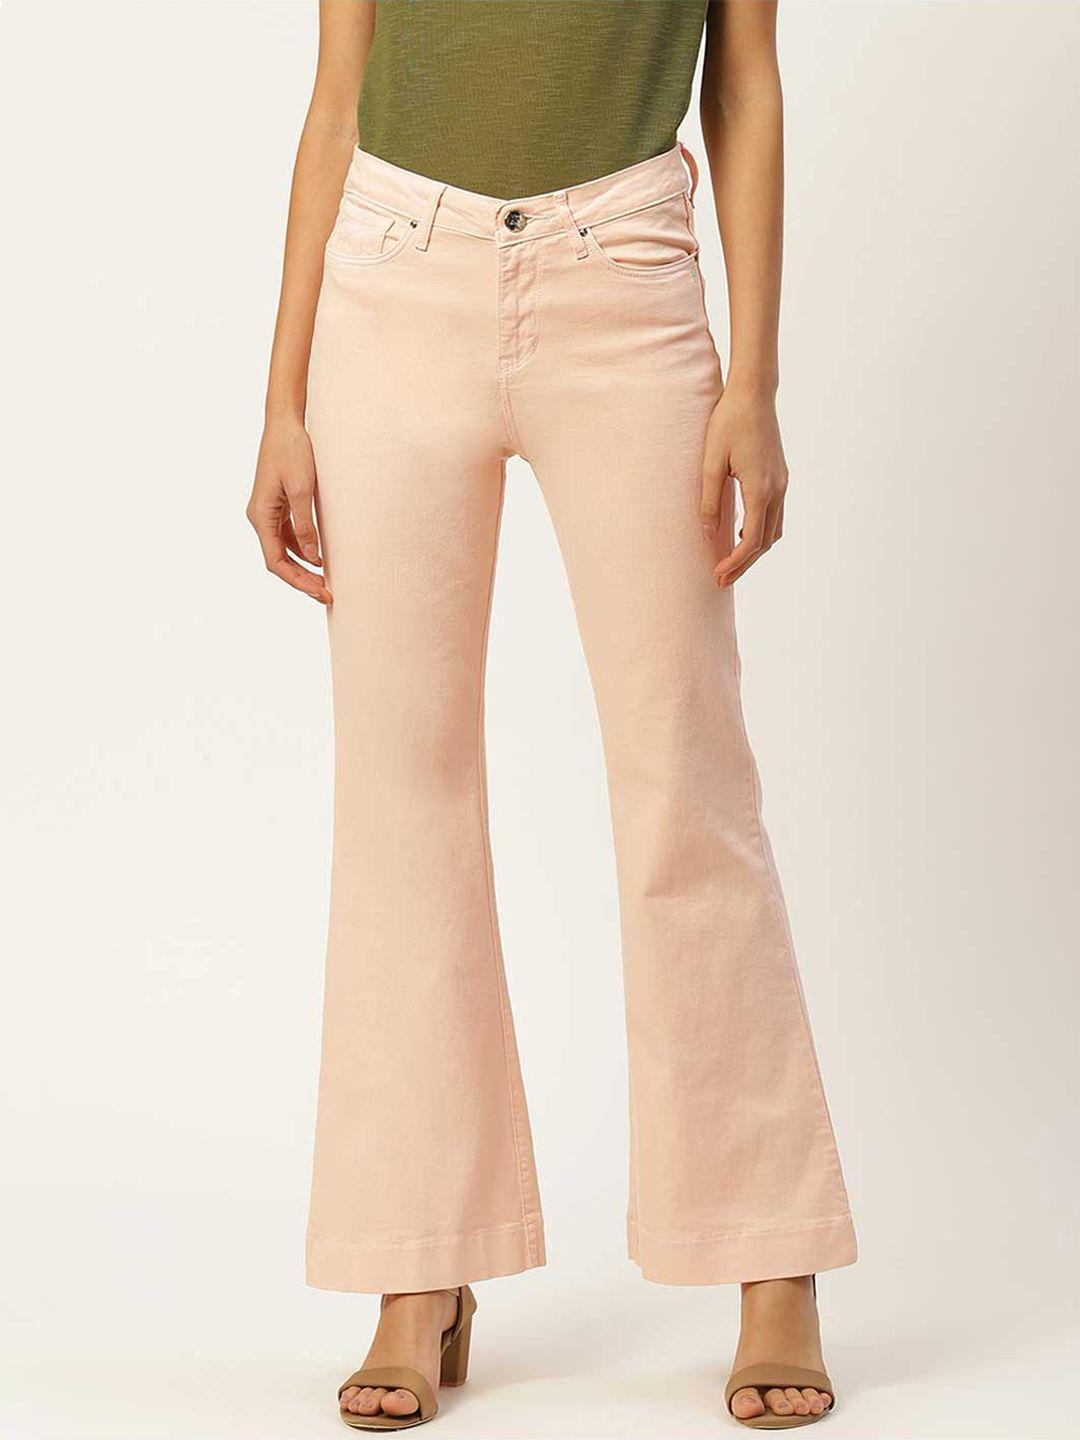 xpose women peach-coloured comfort flared high-rise stretchable jeans